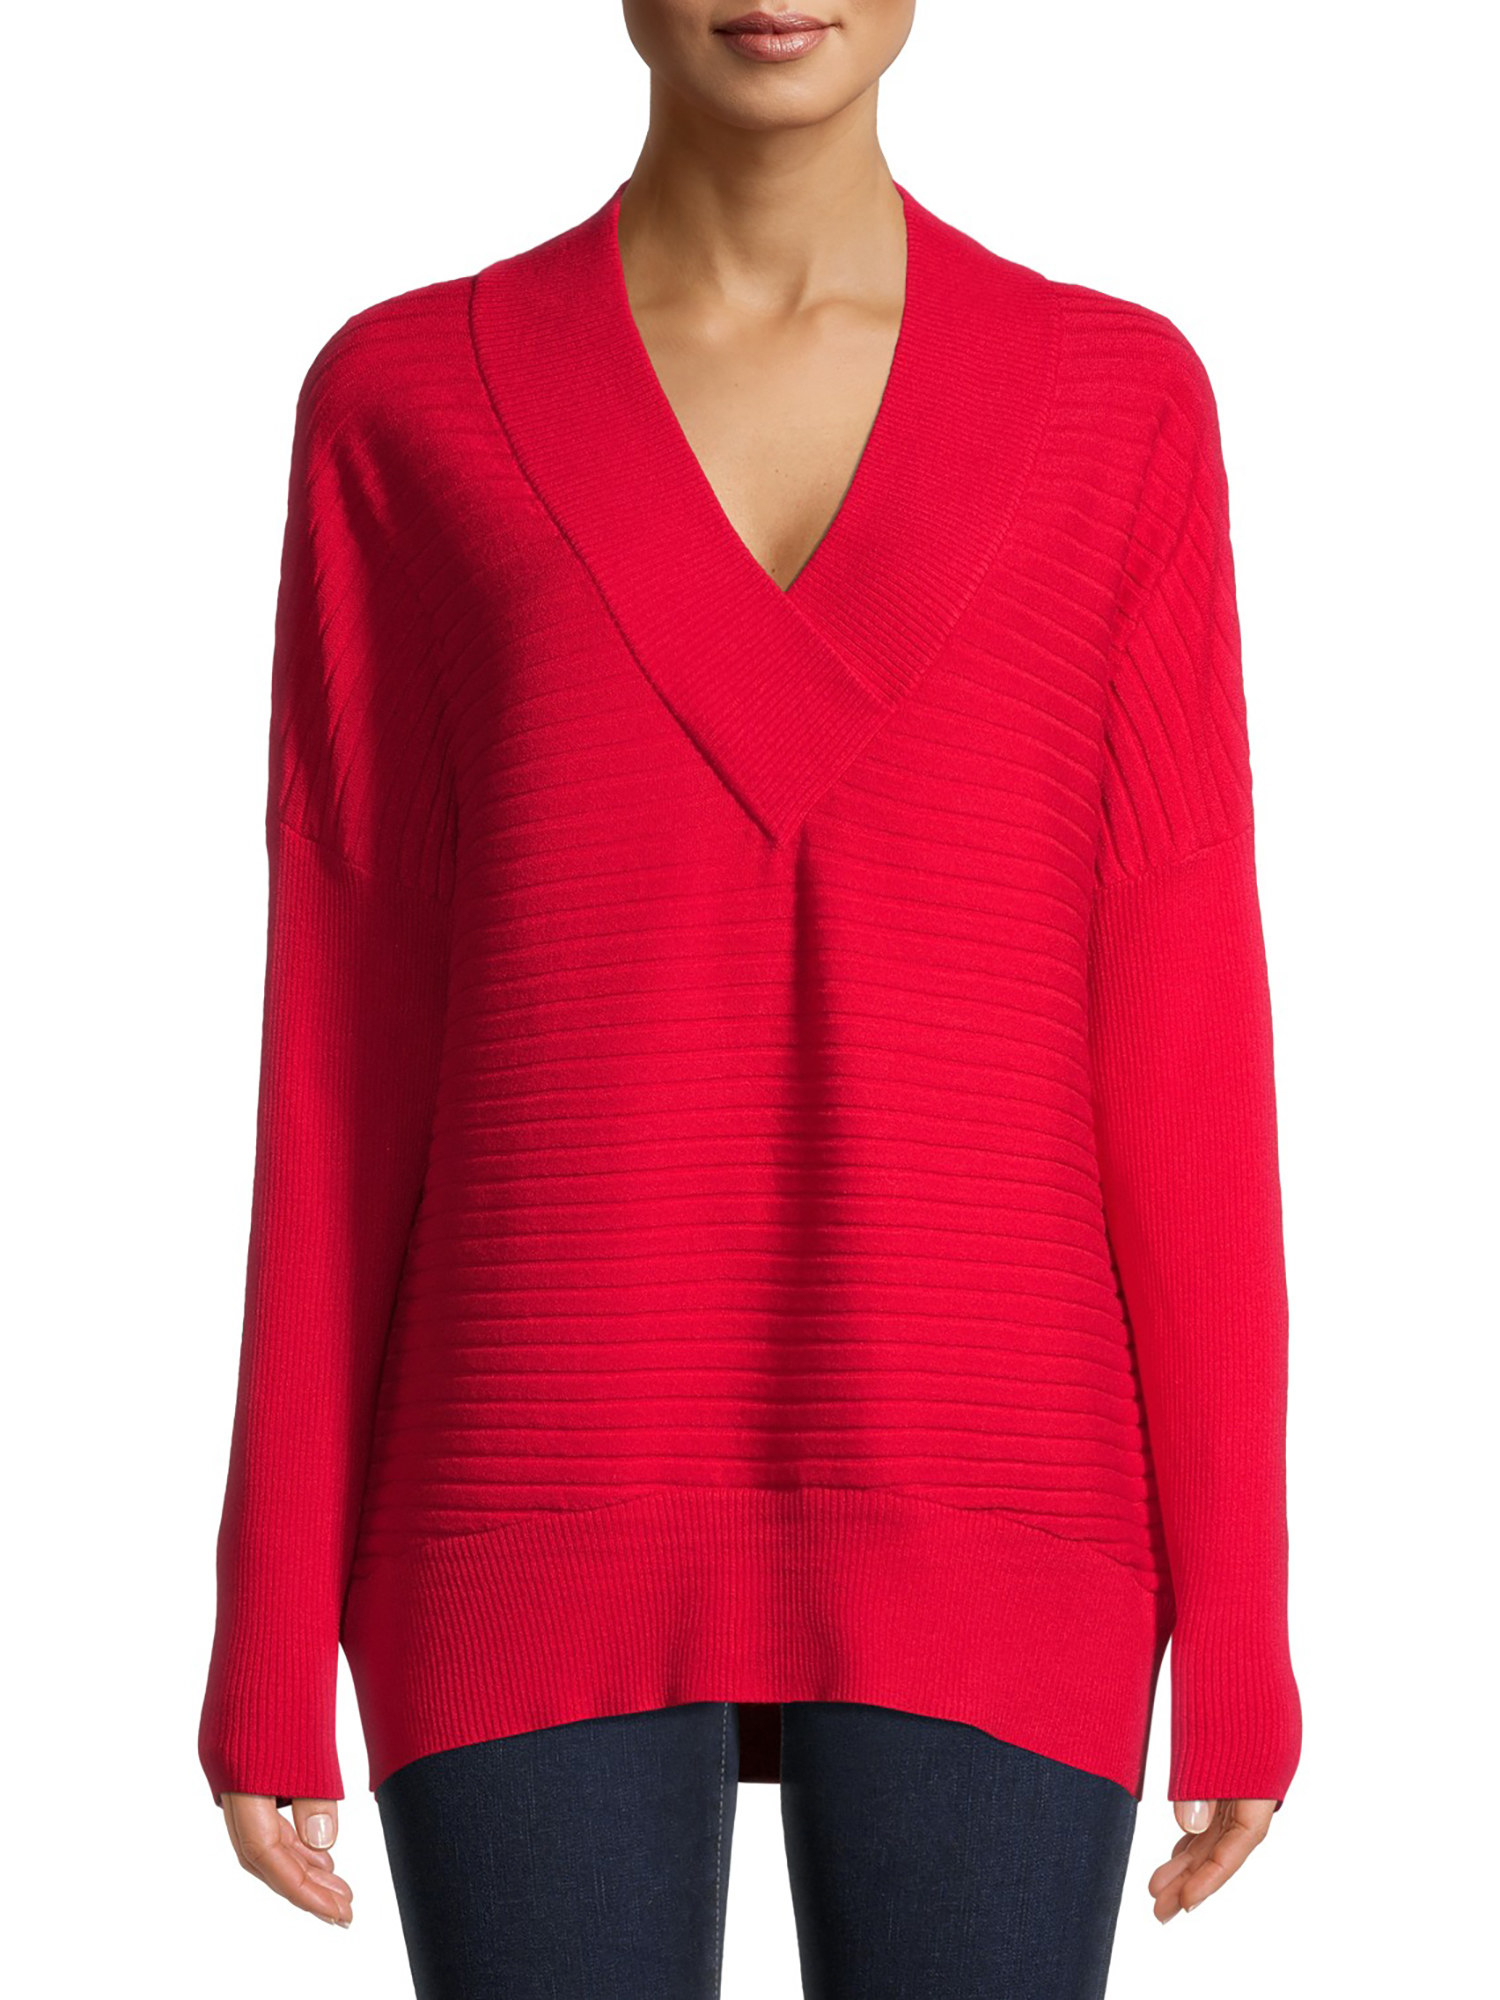 person wearing a long red v-neck sweater